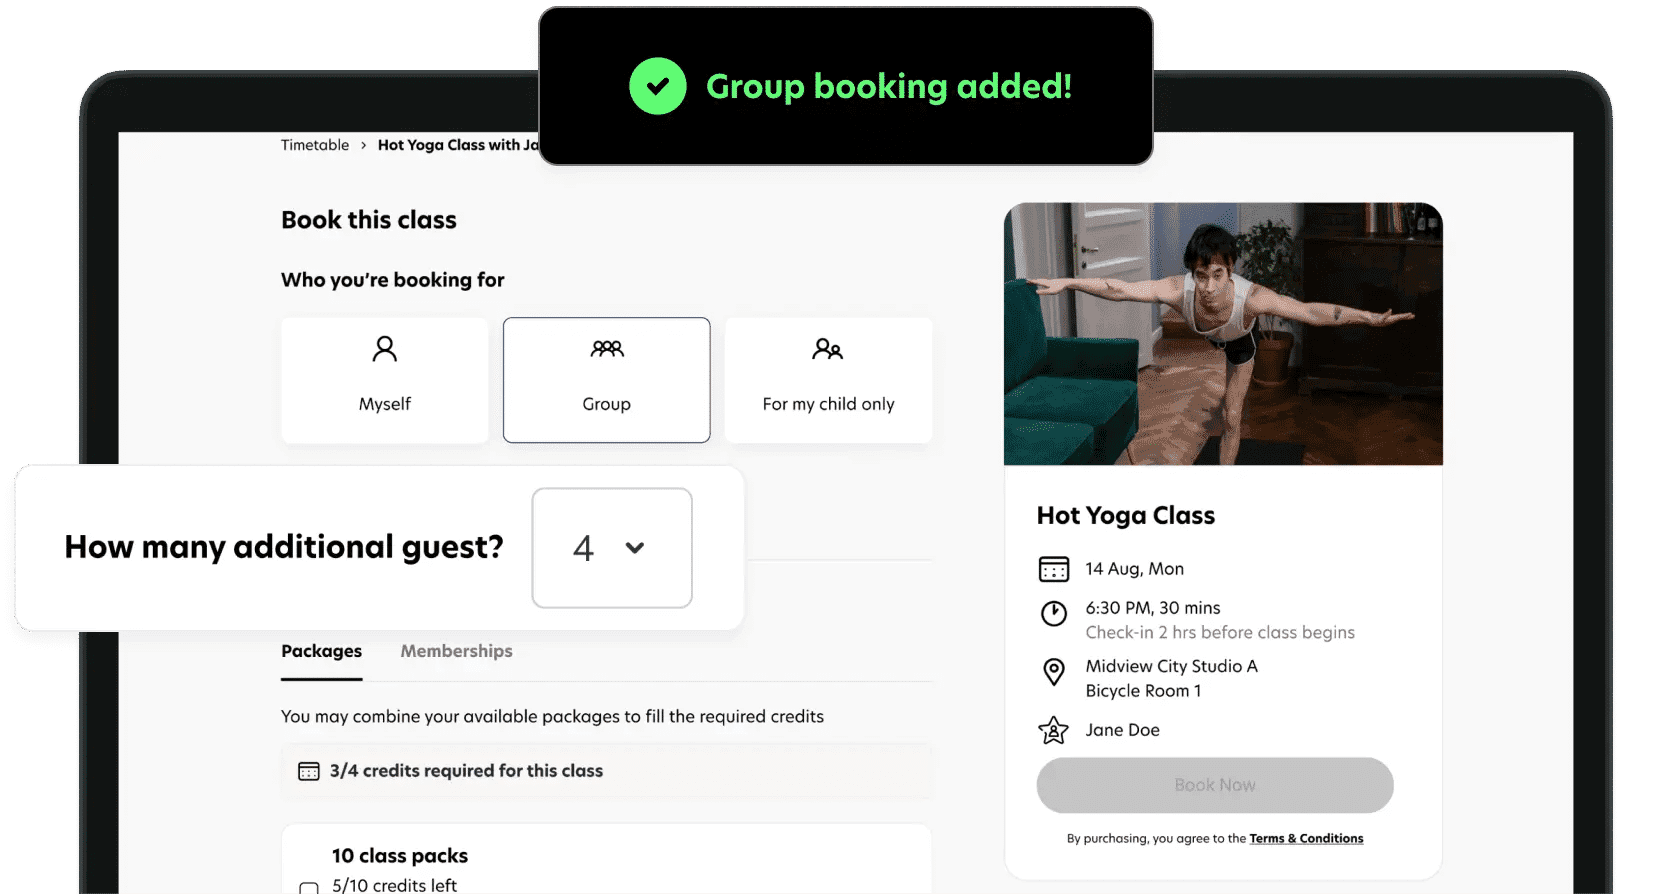 Group booking